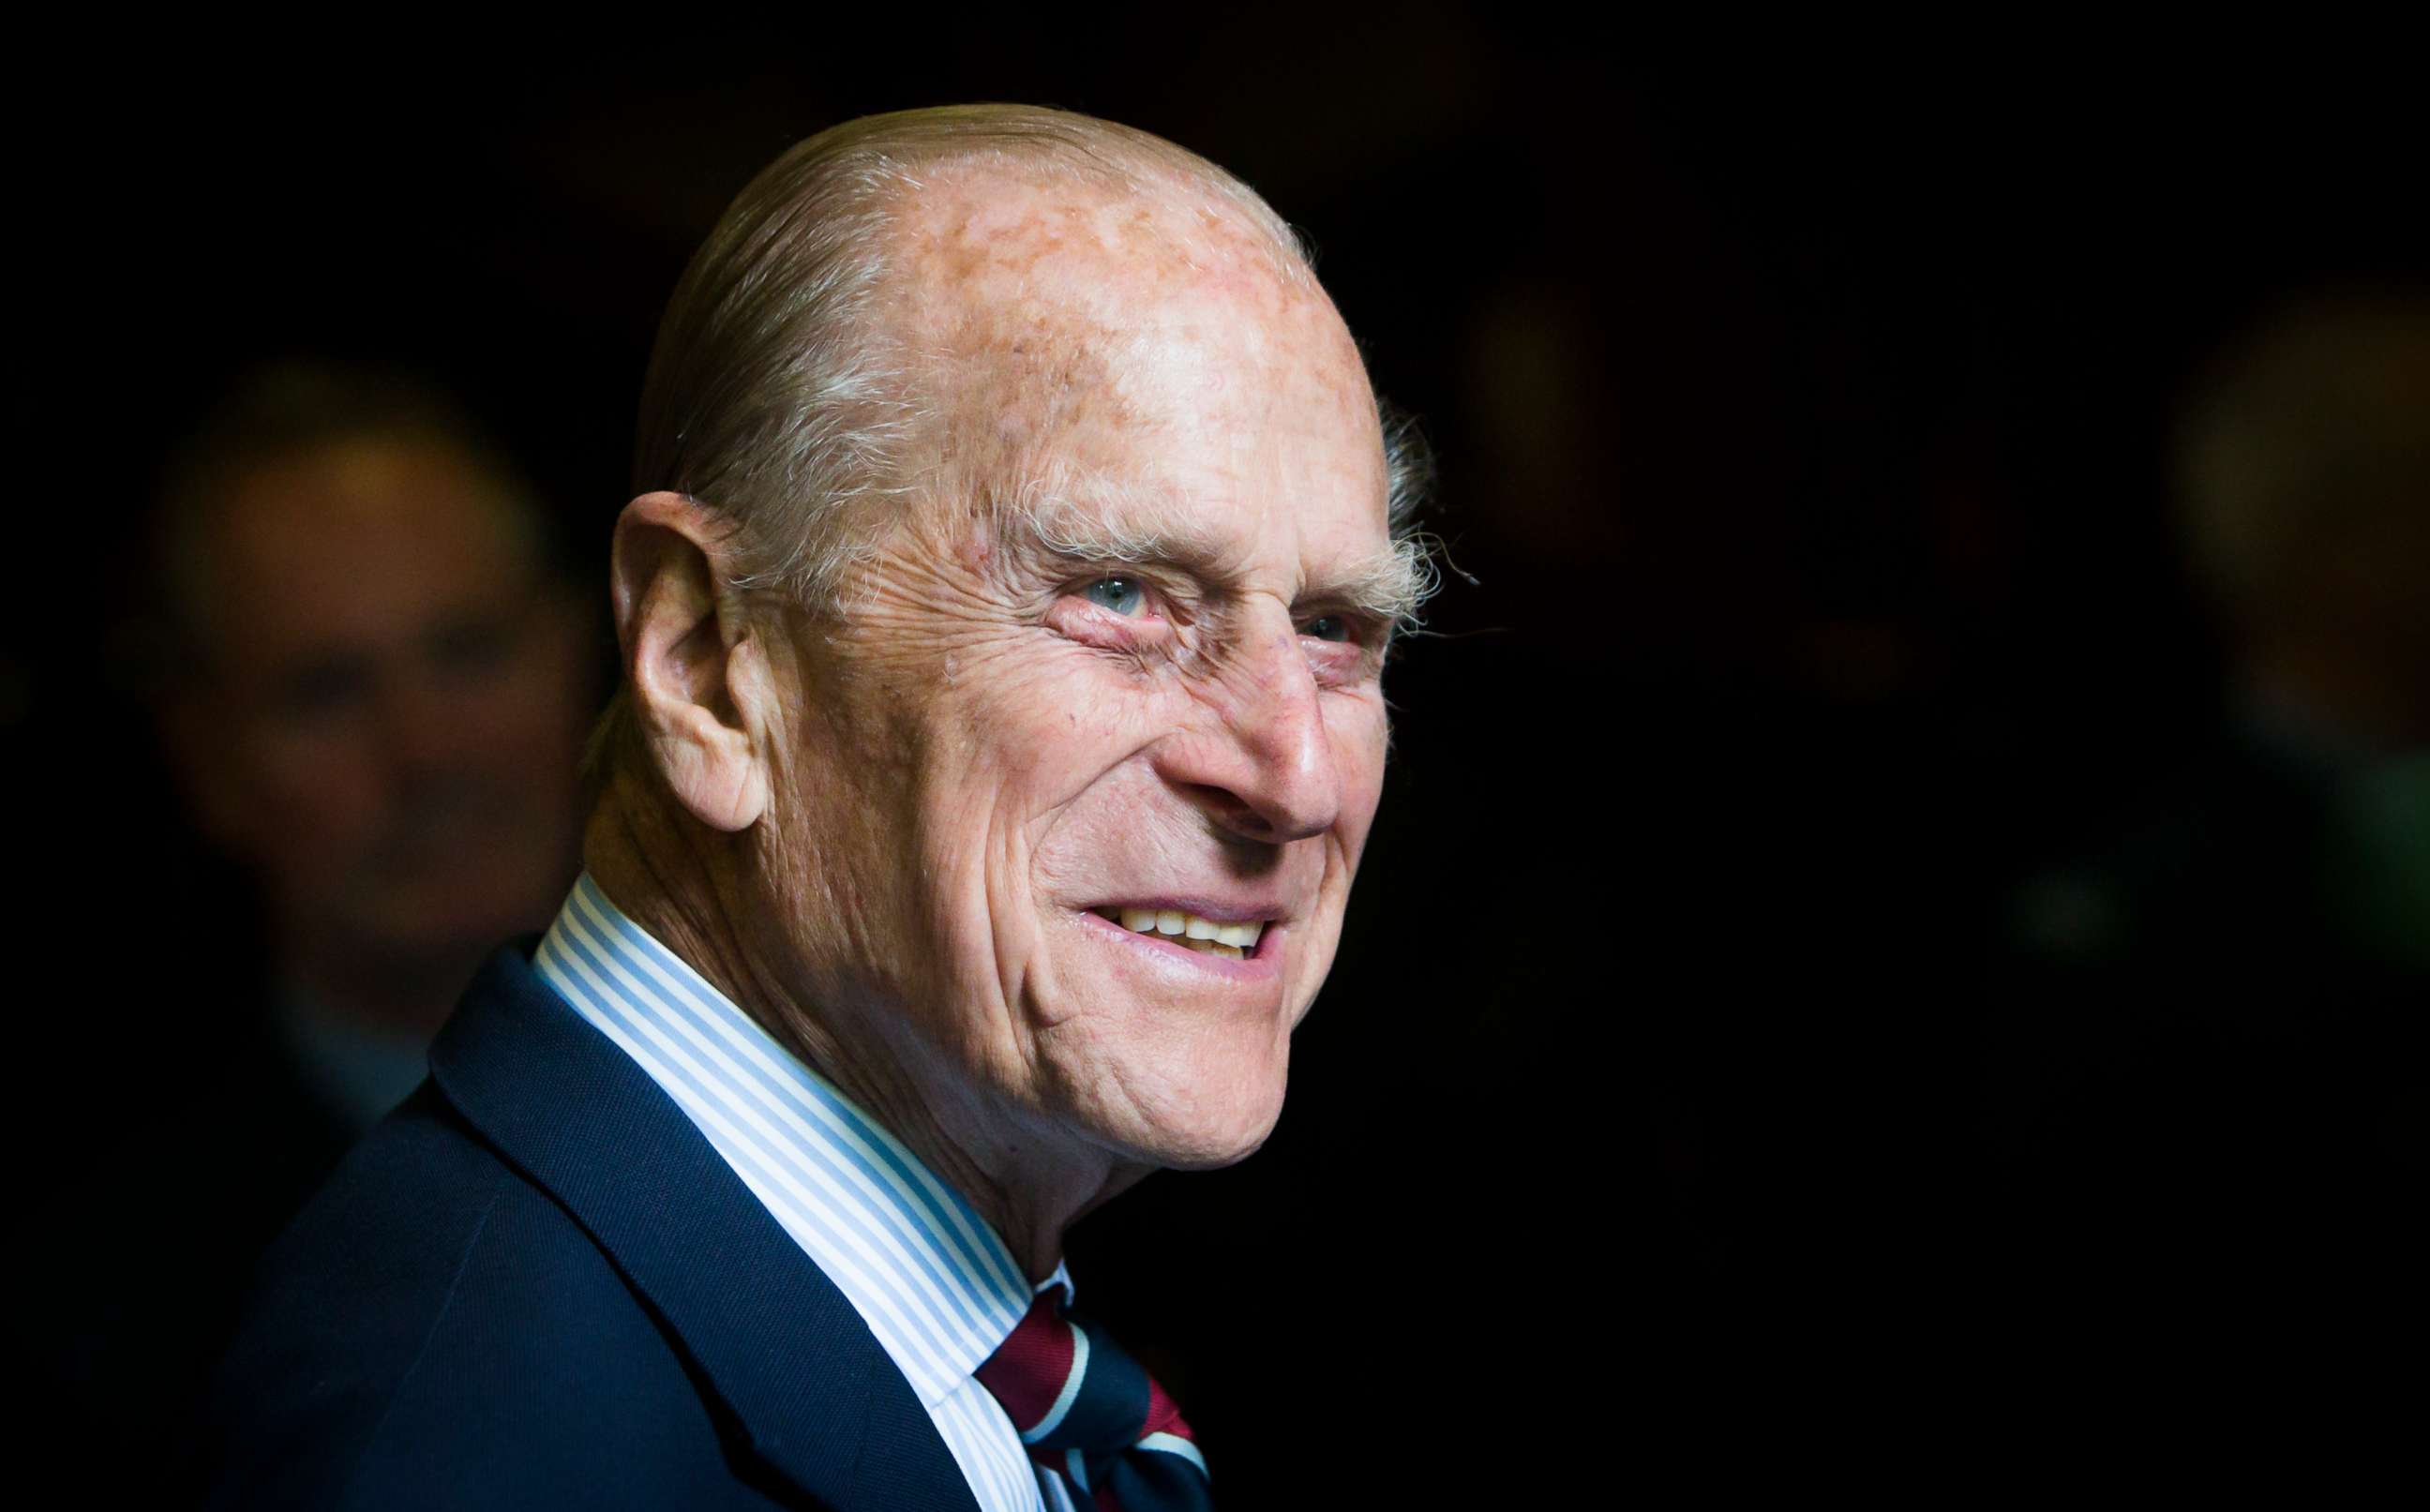 PHOTO: Prince Philip, Duke of Edinburgh smiles during a visit to the headquarters of the Royal Auxiliary Air Force's 603 Squadron on July 4, 2015, in Edinburgh, Scotland.